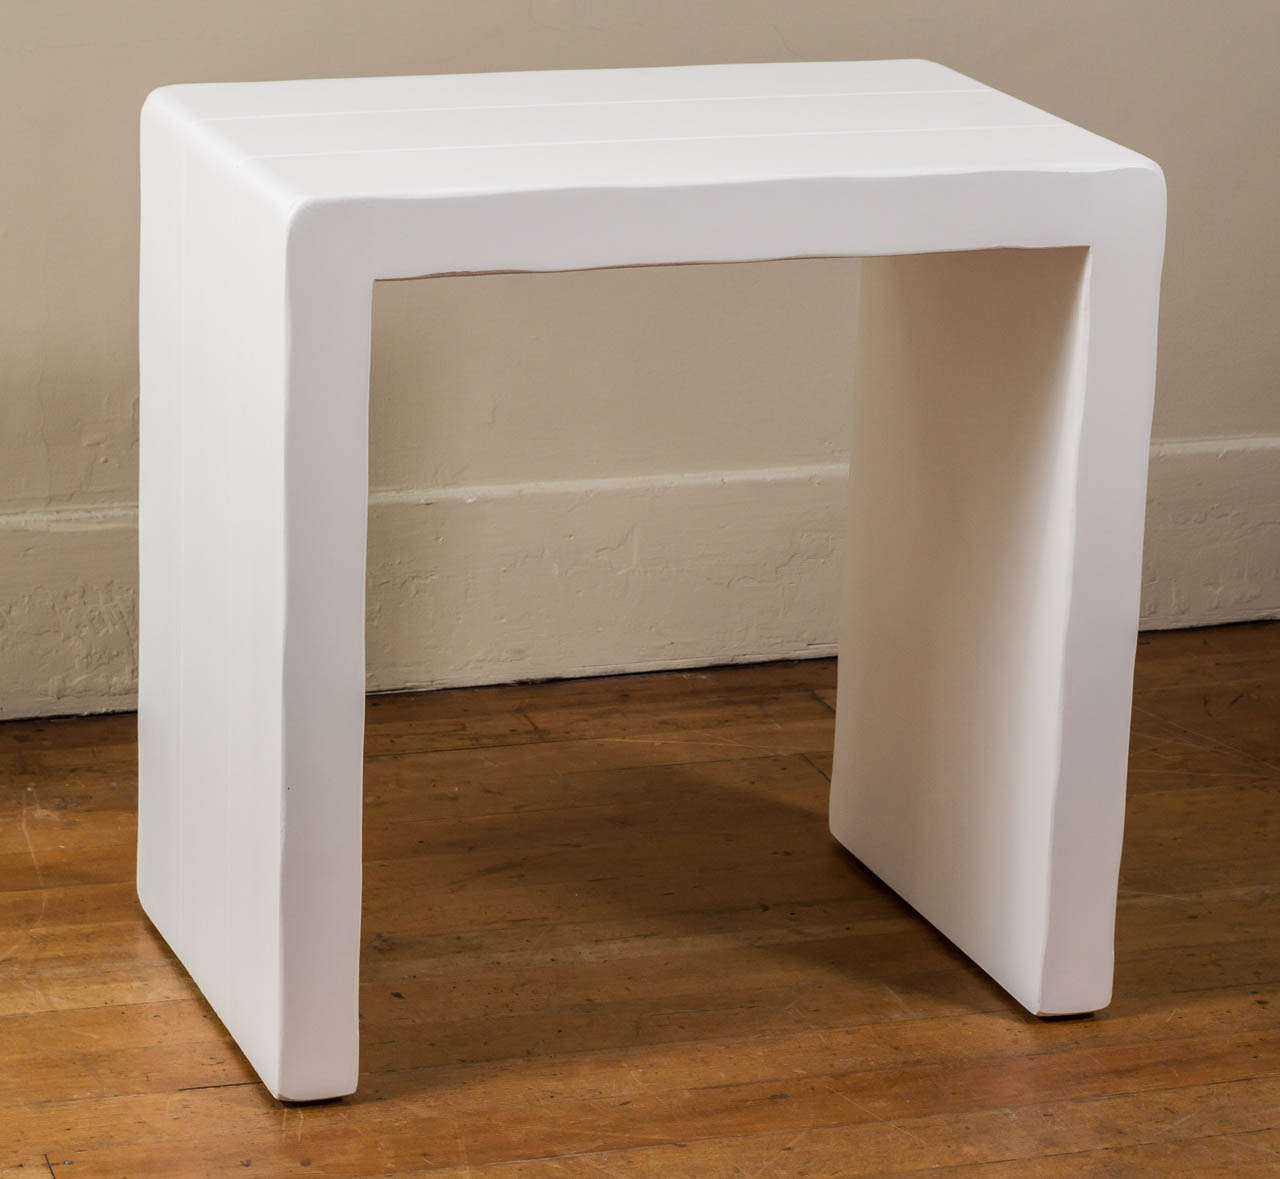 A Dickinson matte white finished grooved hollow wood table from The Sonoma Mission Inn